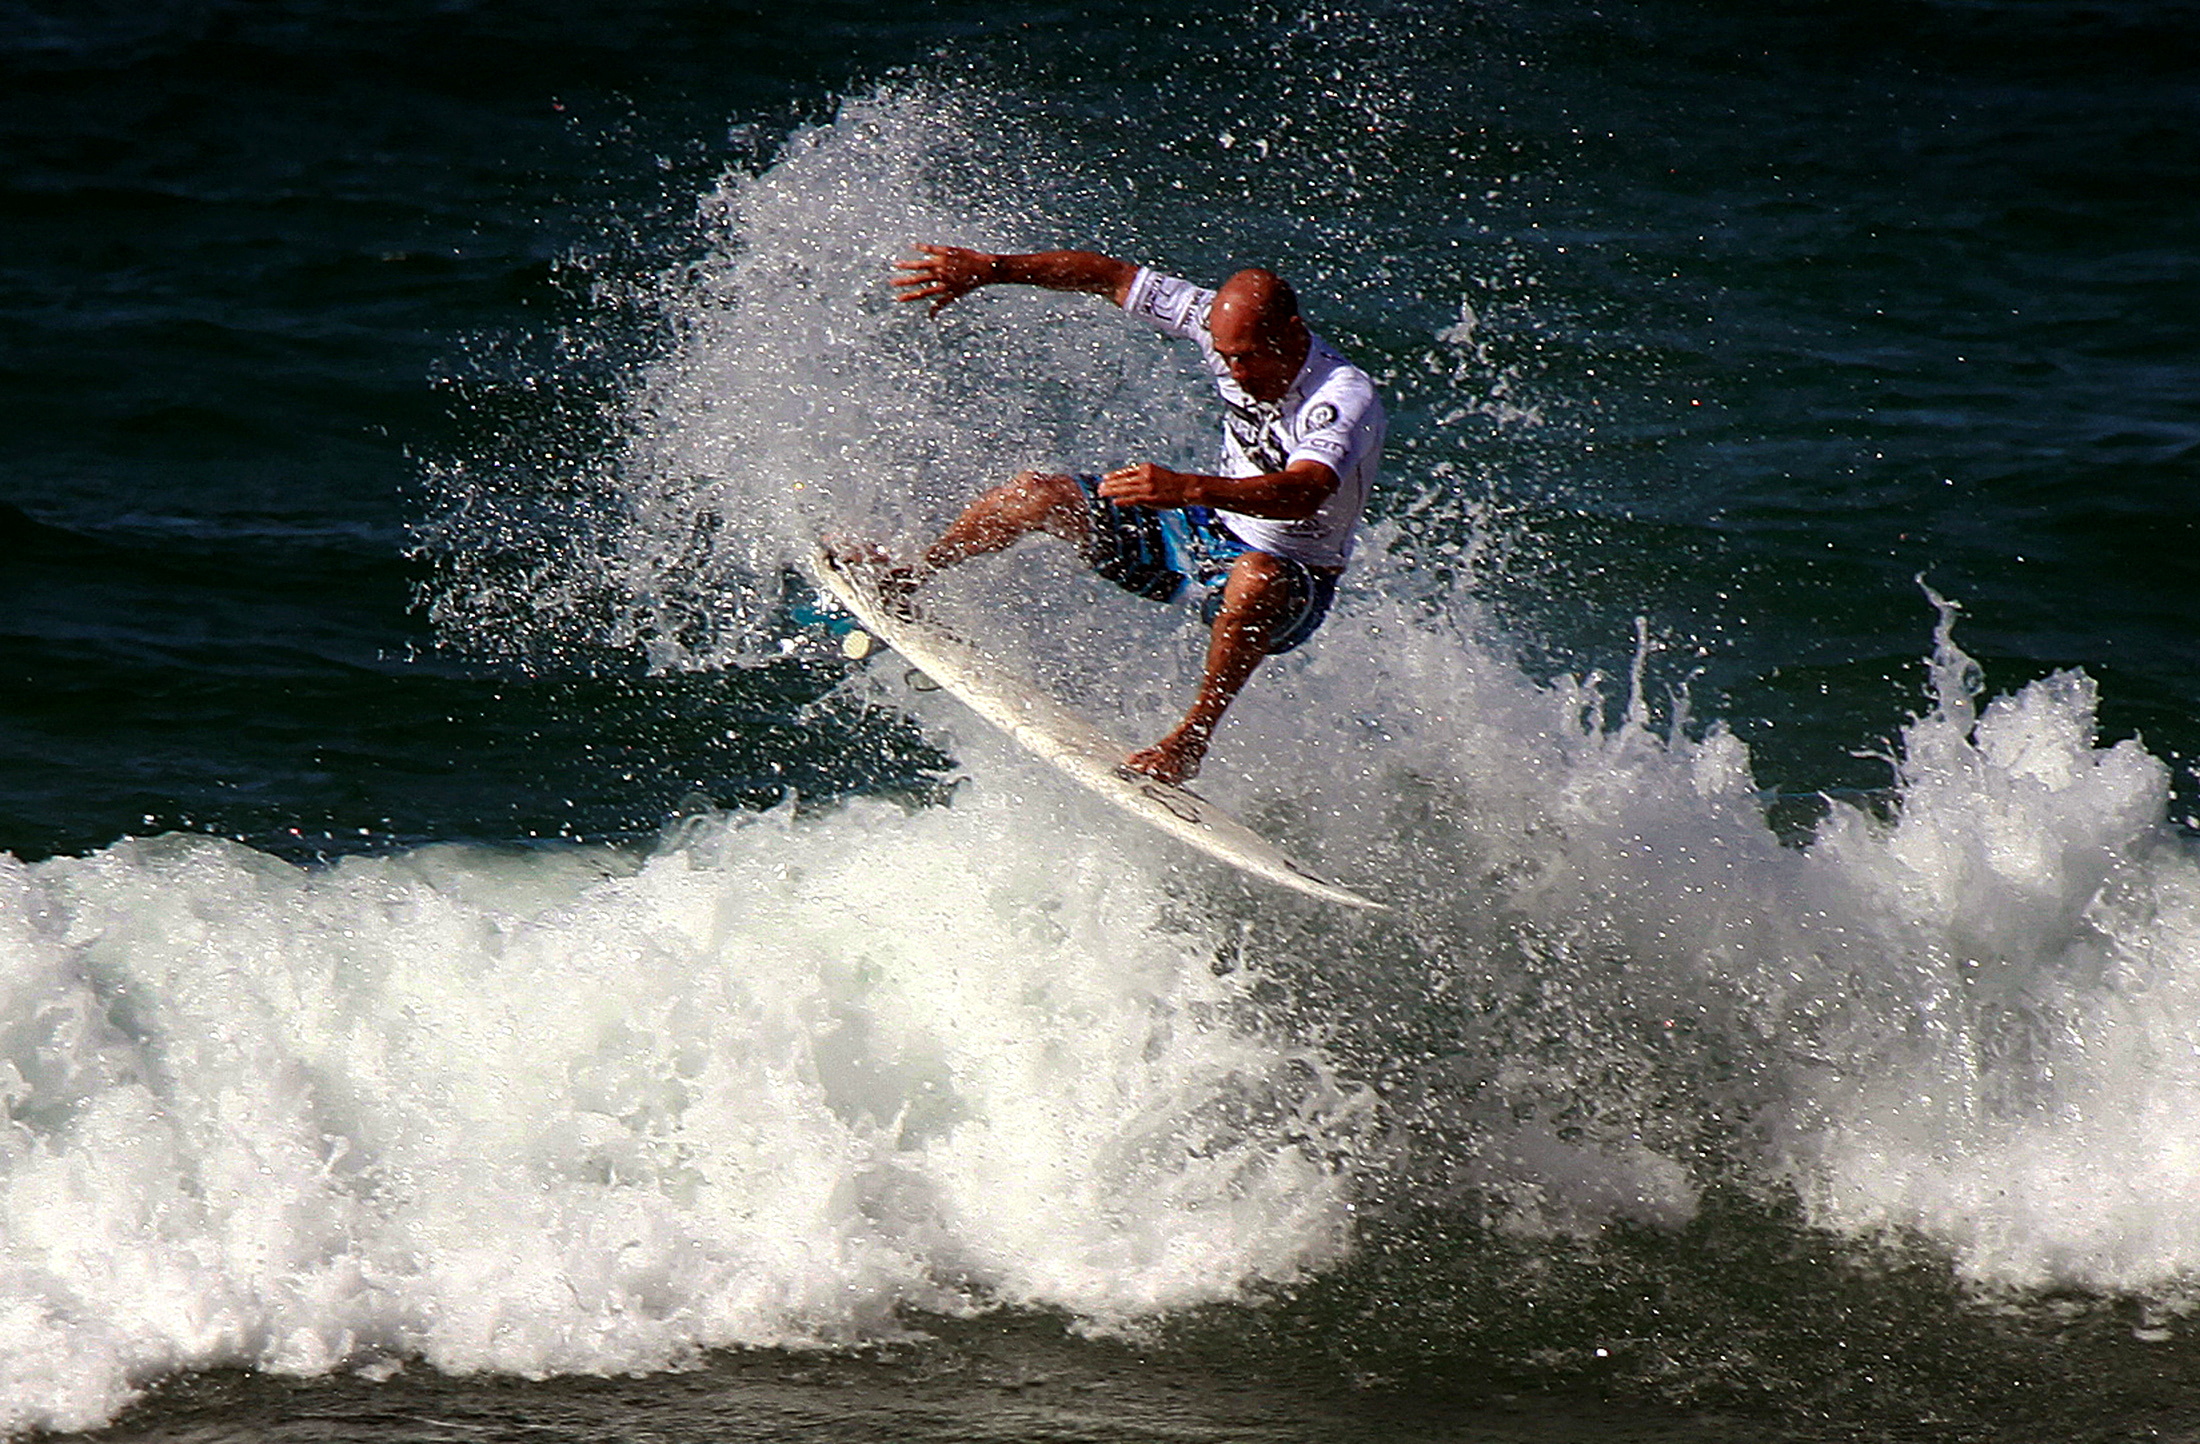 Kelly Slater rides a wave during a promotional event at Sydney's Manly Beach